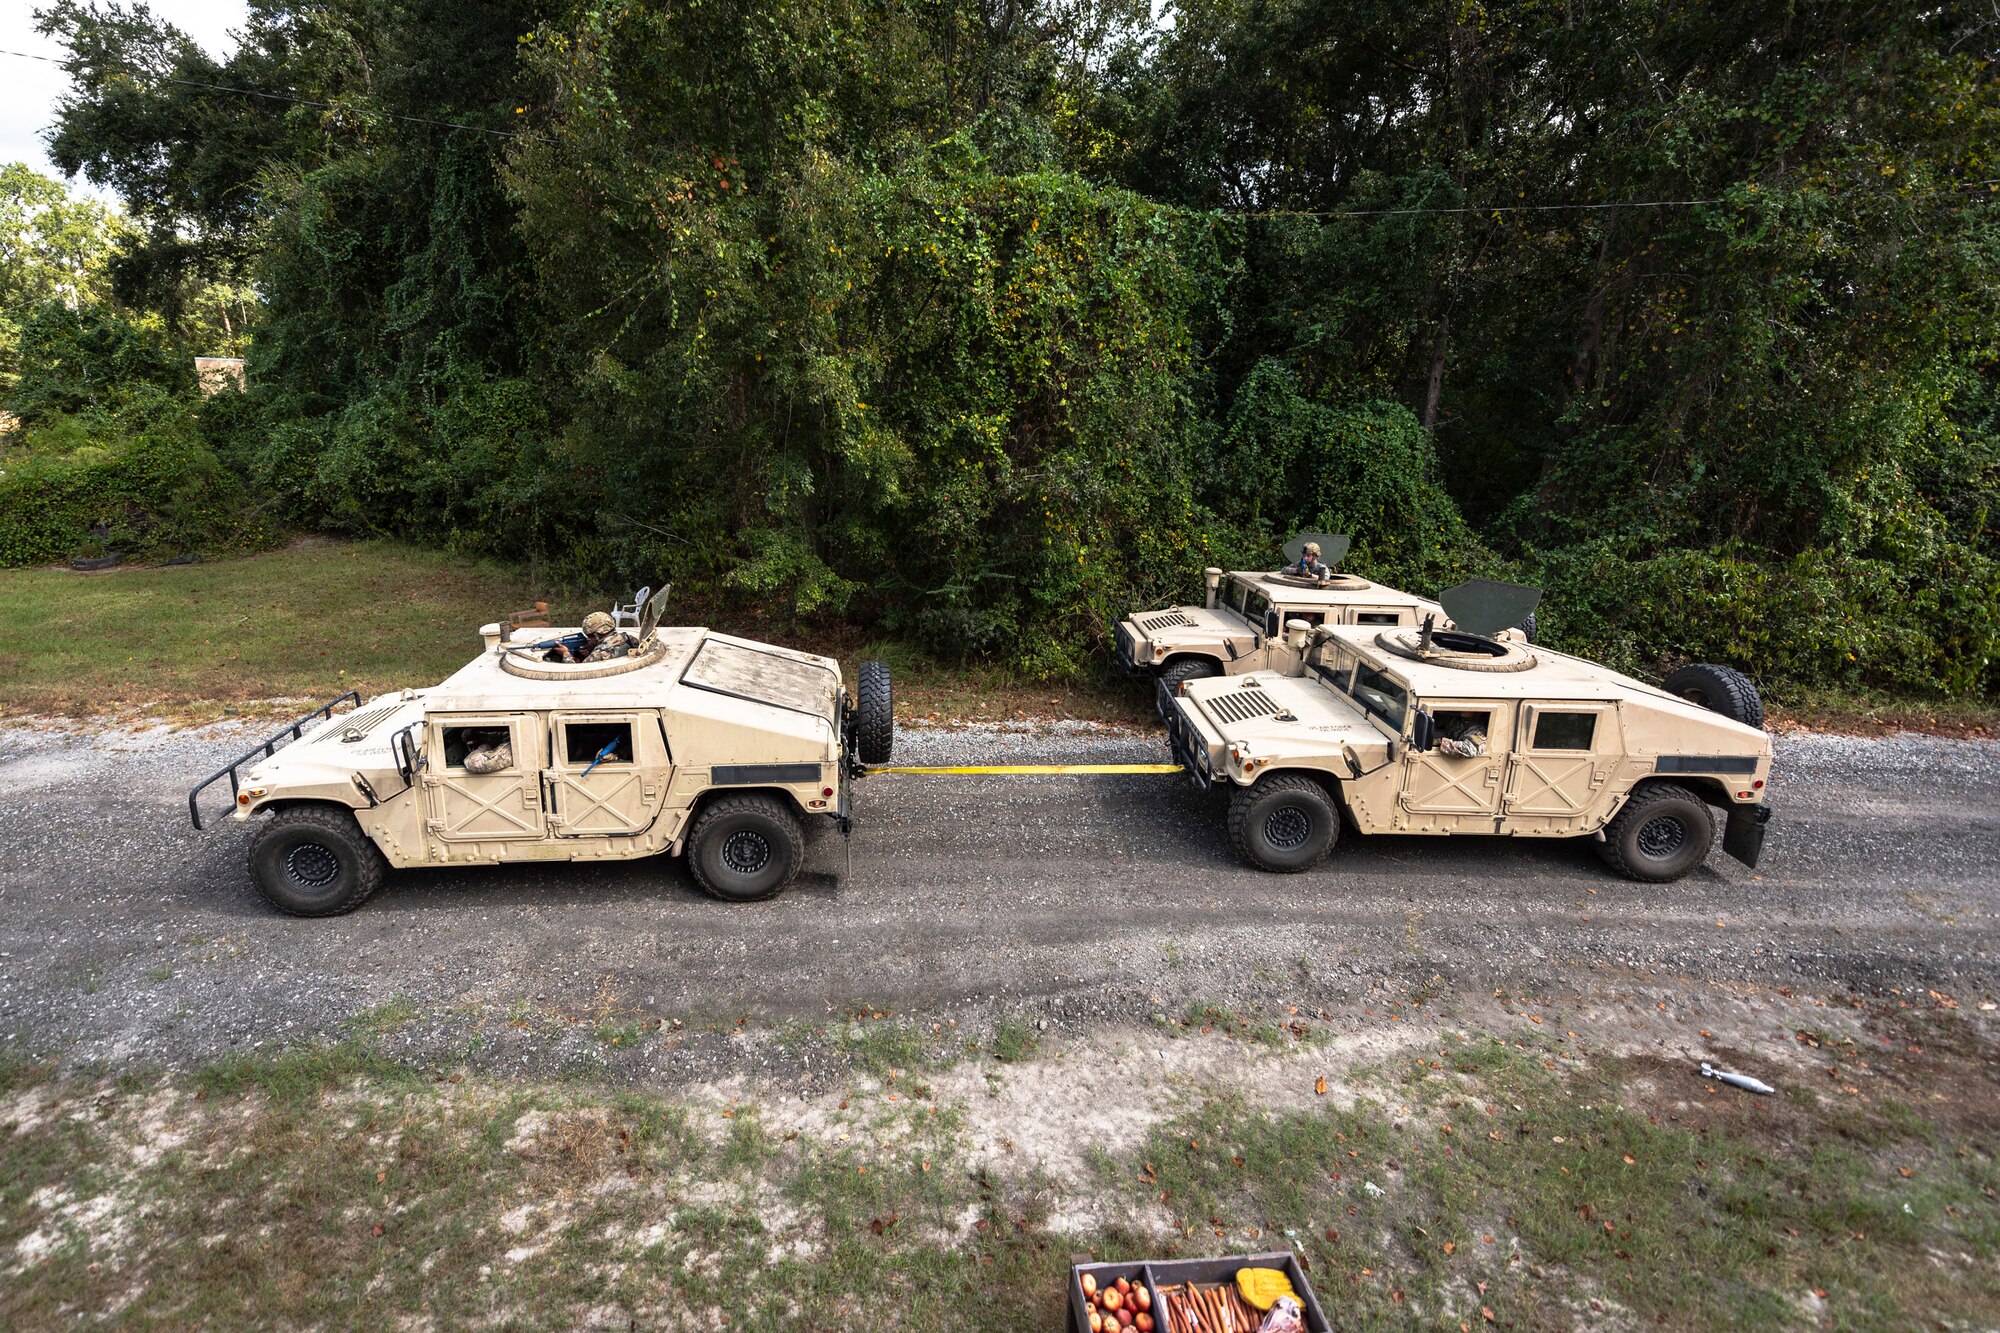 Airmen with the 23d Security Forces Squadron (SFS) conduct vehicle recovery during a field convoy operation Oct. 8, 2019, at Moody Air Force Base, Ga. The field convoy operation gave 23d SFS Airmen an opportunity to improve the ability to shoot, move and communicate, ensuring the Airmen are properly trained and prepared to carry out their mission in a contested environment. (U.S. Air Force photo by Airman 1st Class Taryn Butler)